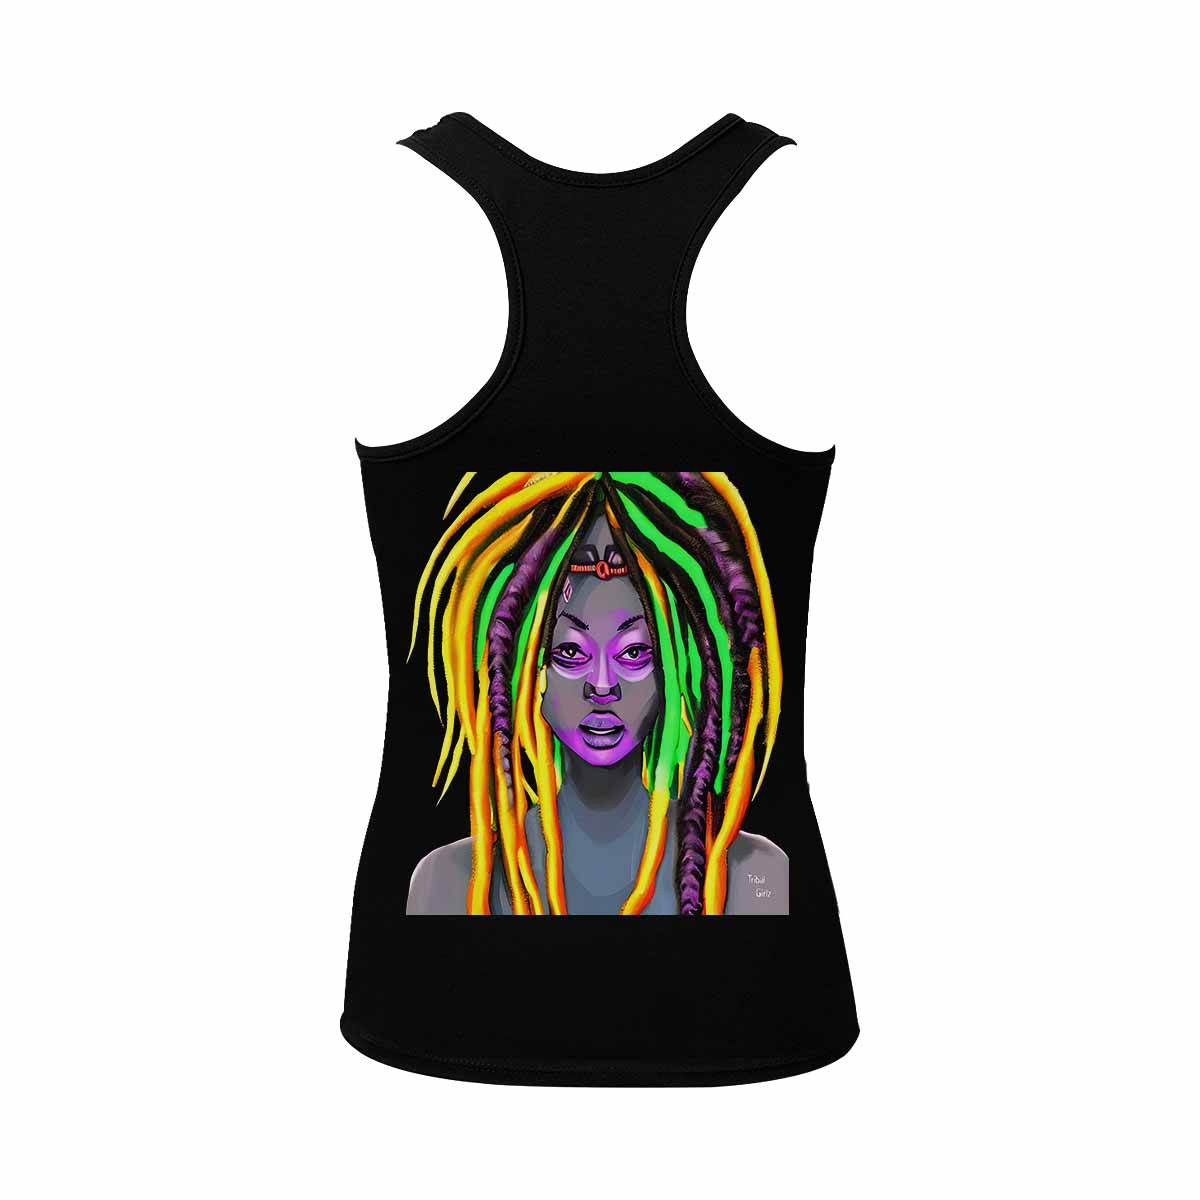 Dreads & Braids, BLACK tank top, cotton, african tribal, outline MCL, Fulangiara 28